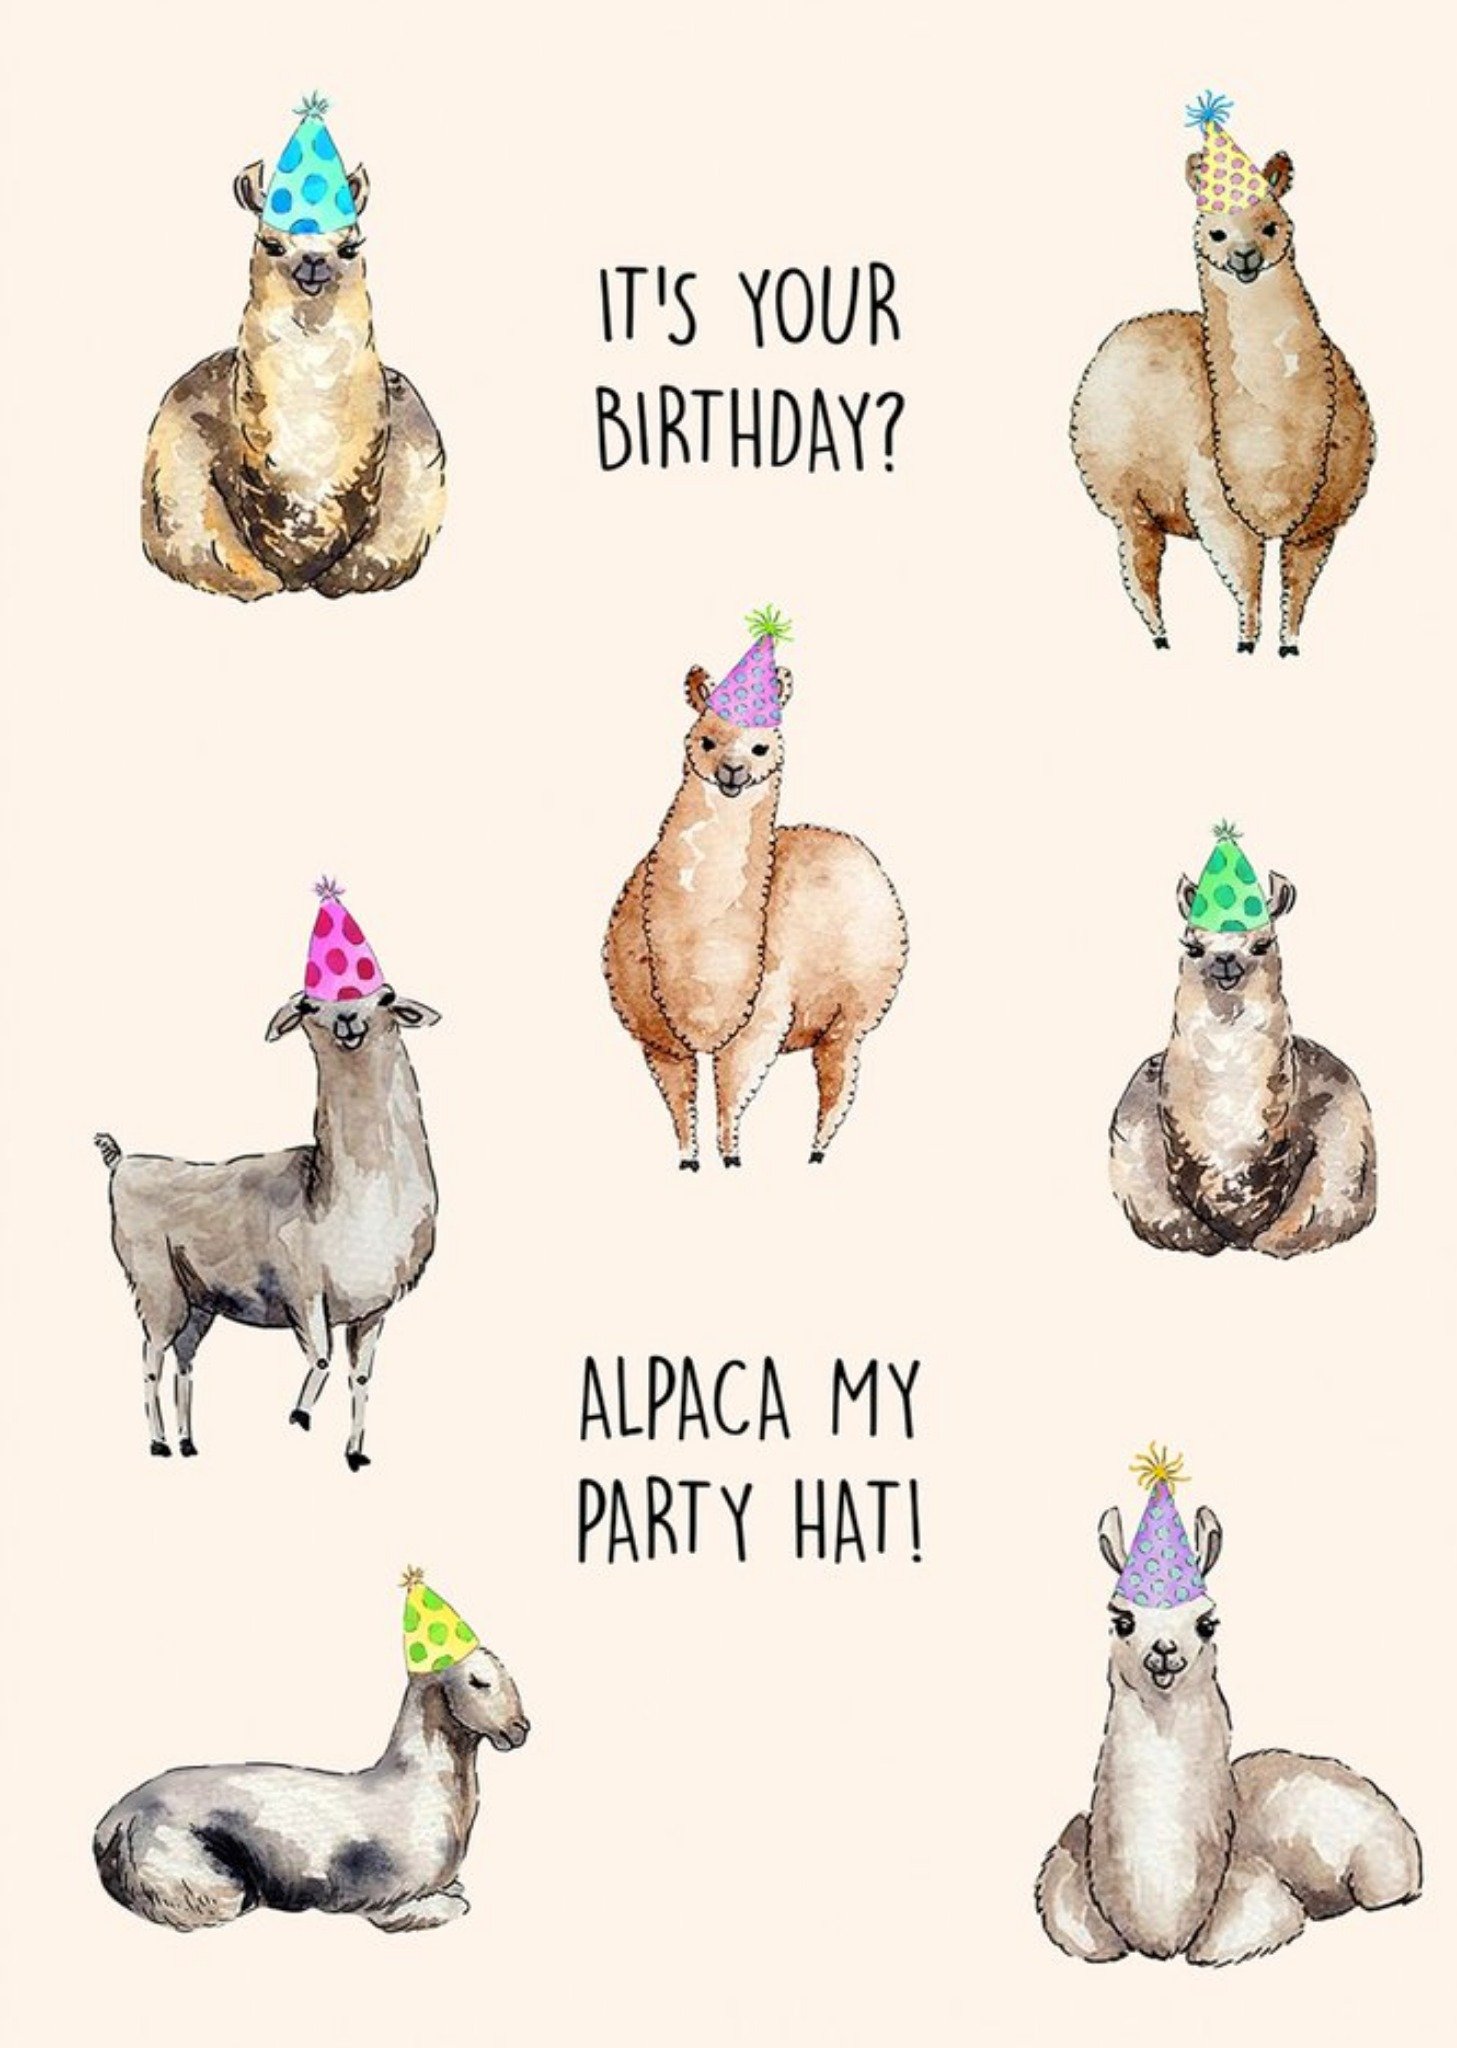 Moonpig Poppy And Mabel It's Your Birthday? Alpaca My Party Hat Birthday Card Ecard